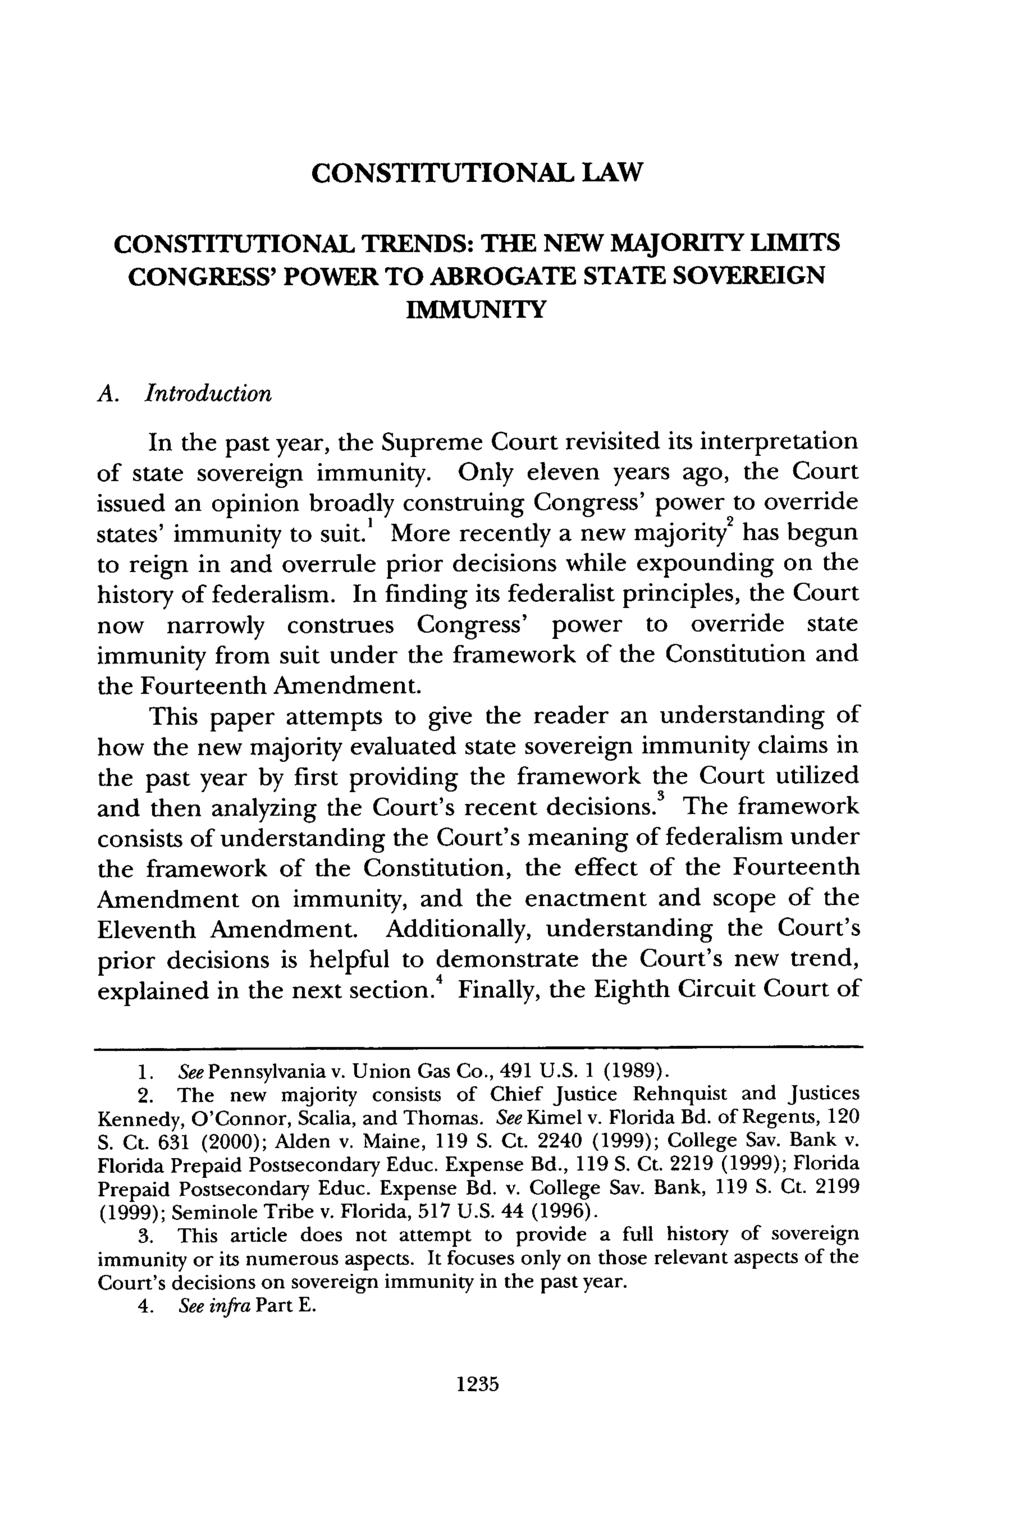 Senkbeil: A Survey of Recent Developments in the Law: Constitutional Law CONSTITUTIONAL LAW CONSTITUTIONAL TRENDS: THE NEW MAJORITY LIMITS CONGRESS' POWER TO ABROGATE STATE SOVEREIGN IMMUNITY A.